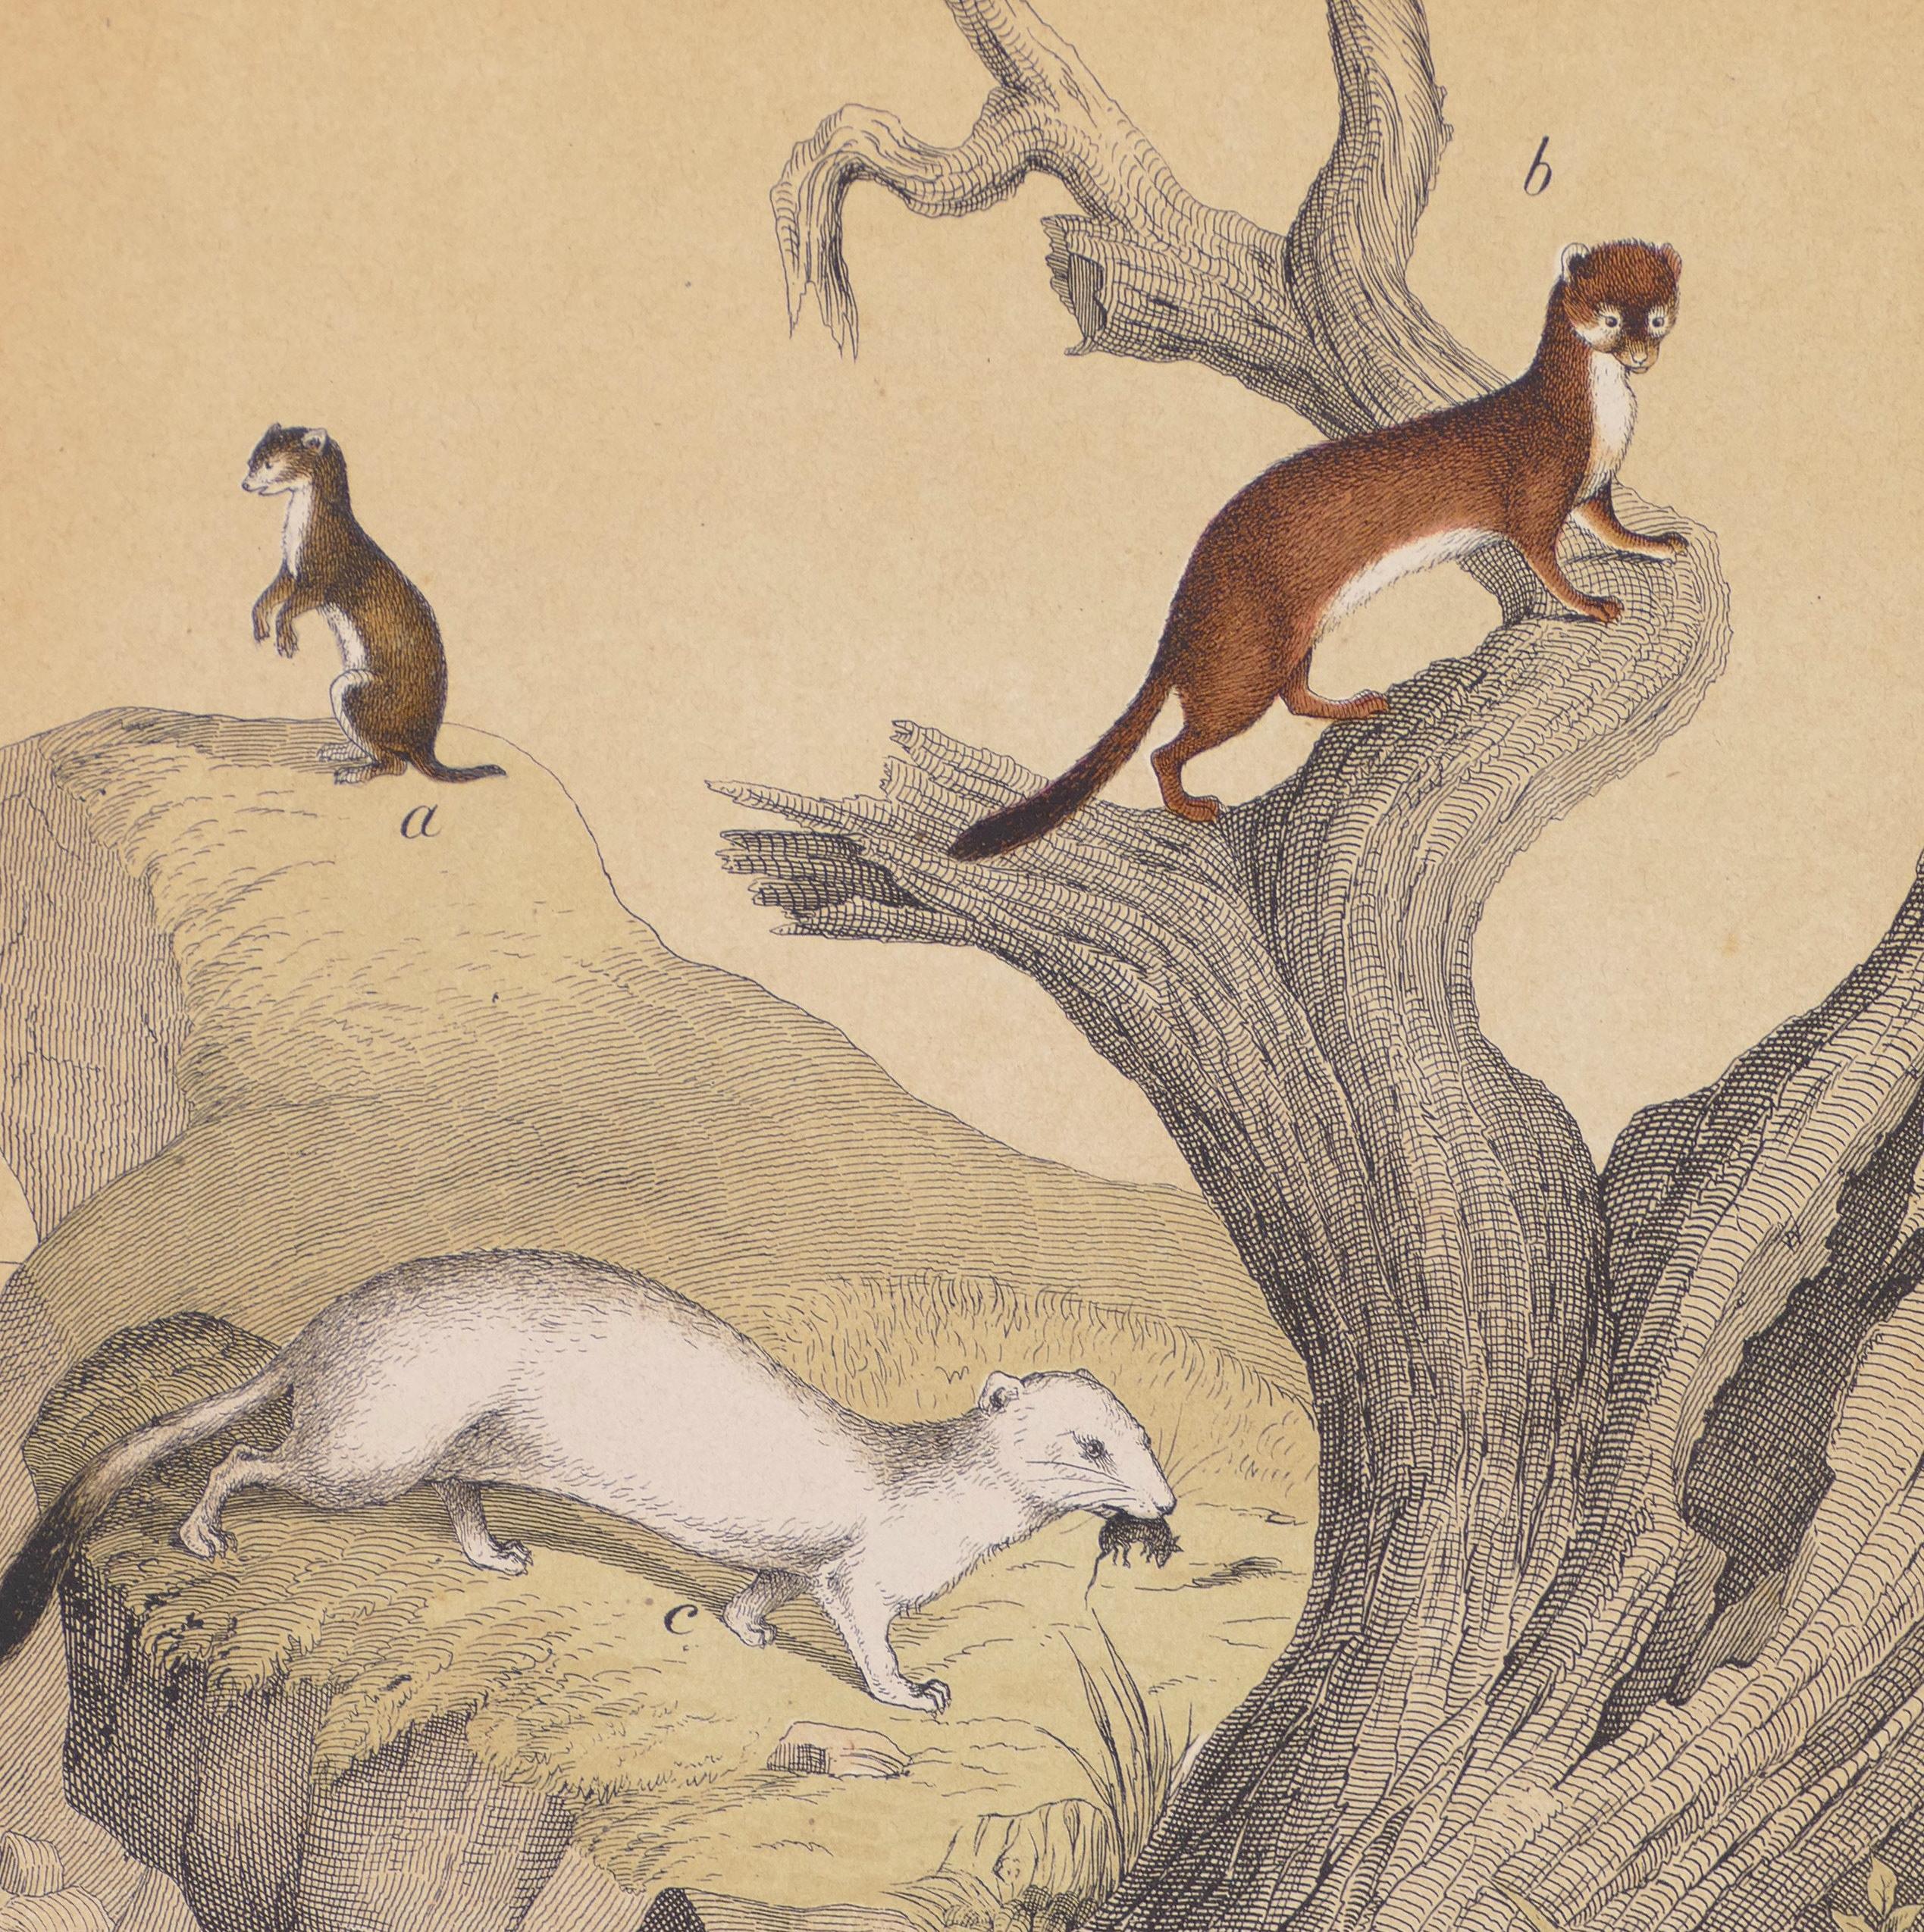 Stoats on a Rock - Original Lithograph - Late 19th Century - Print by Unknown